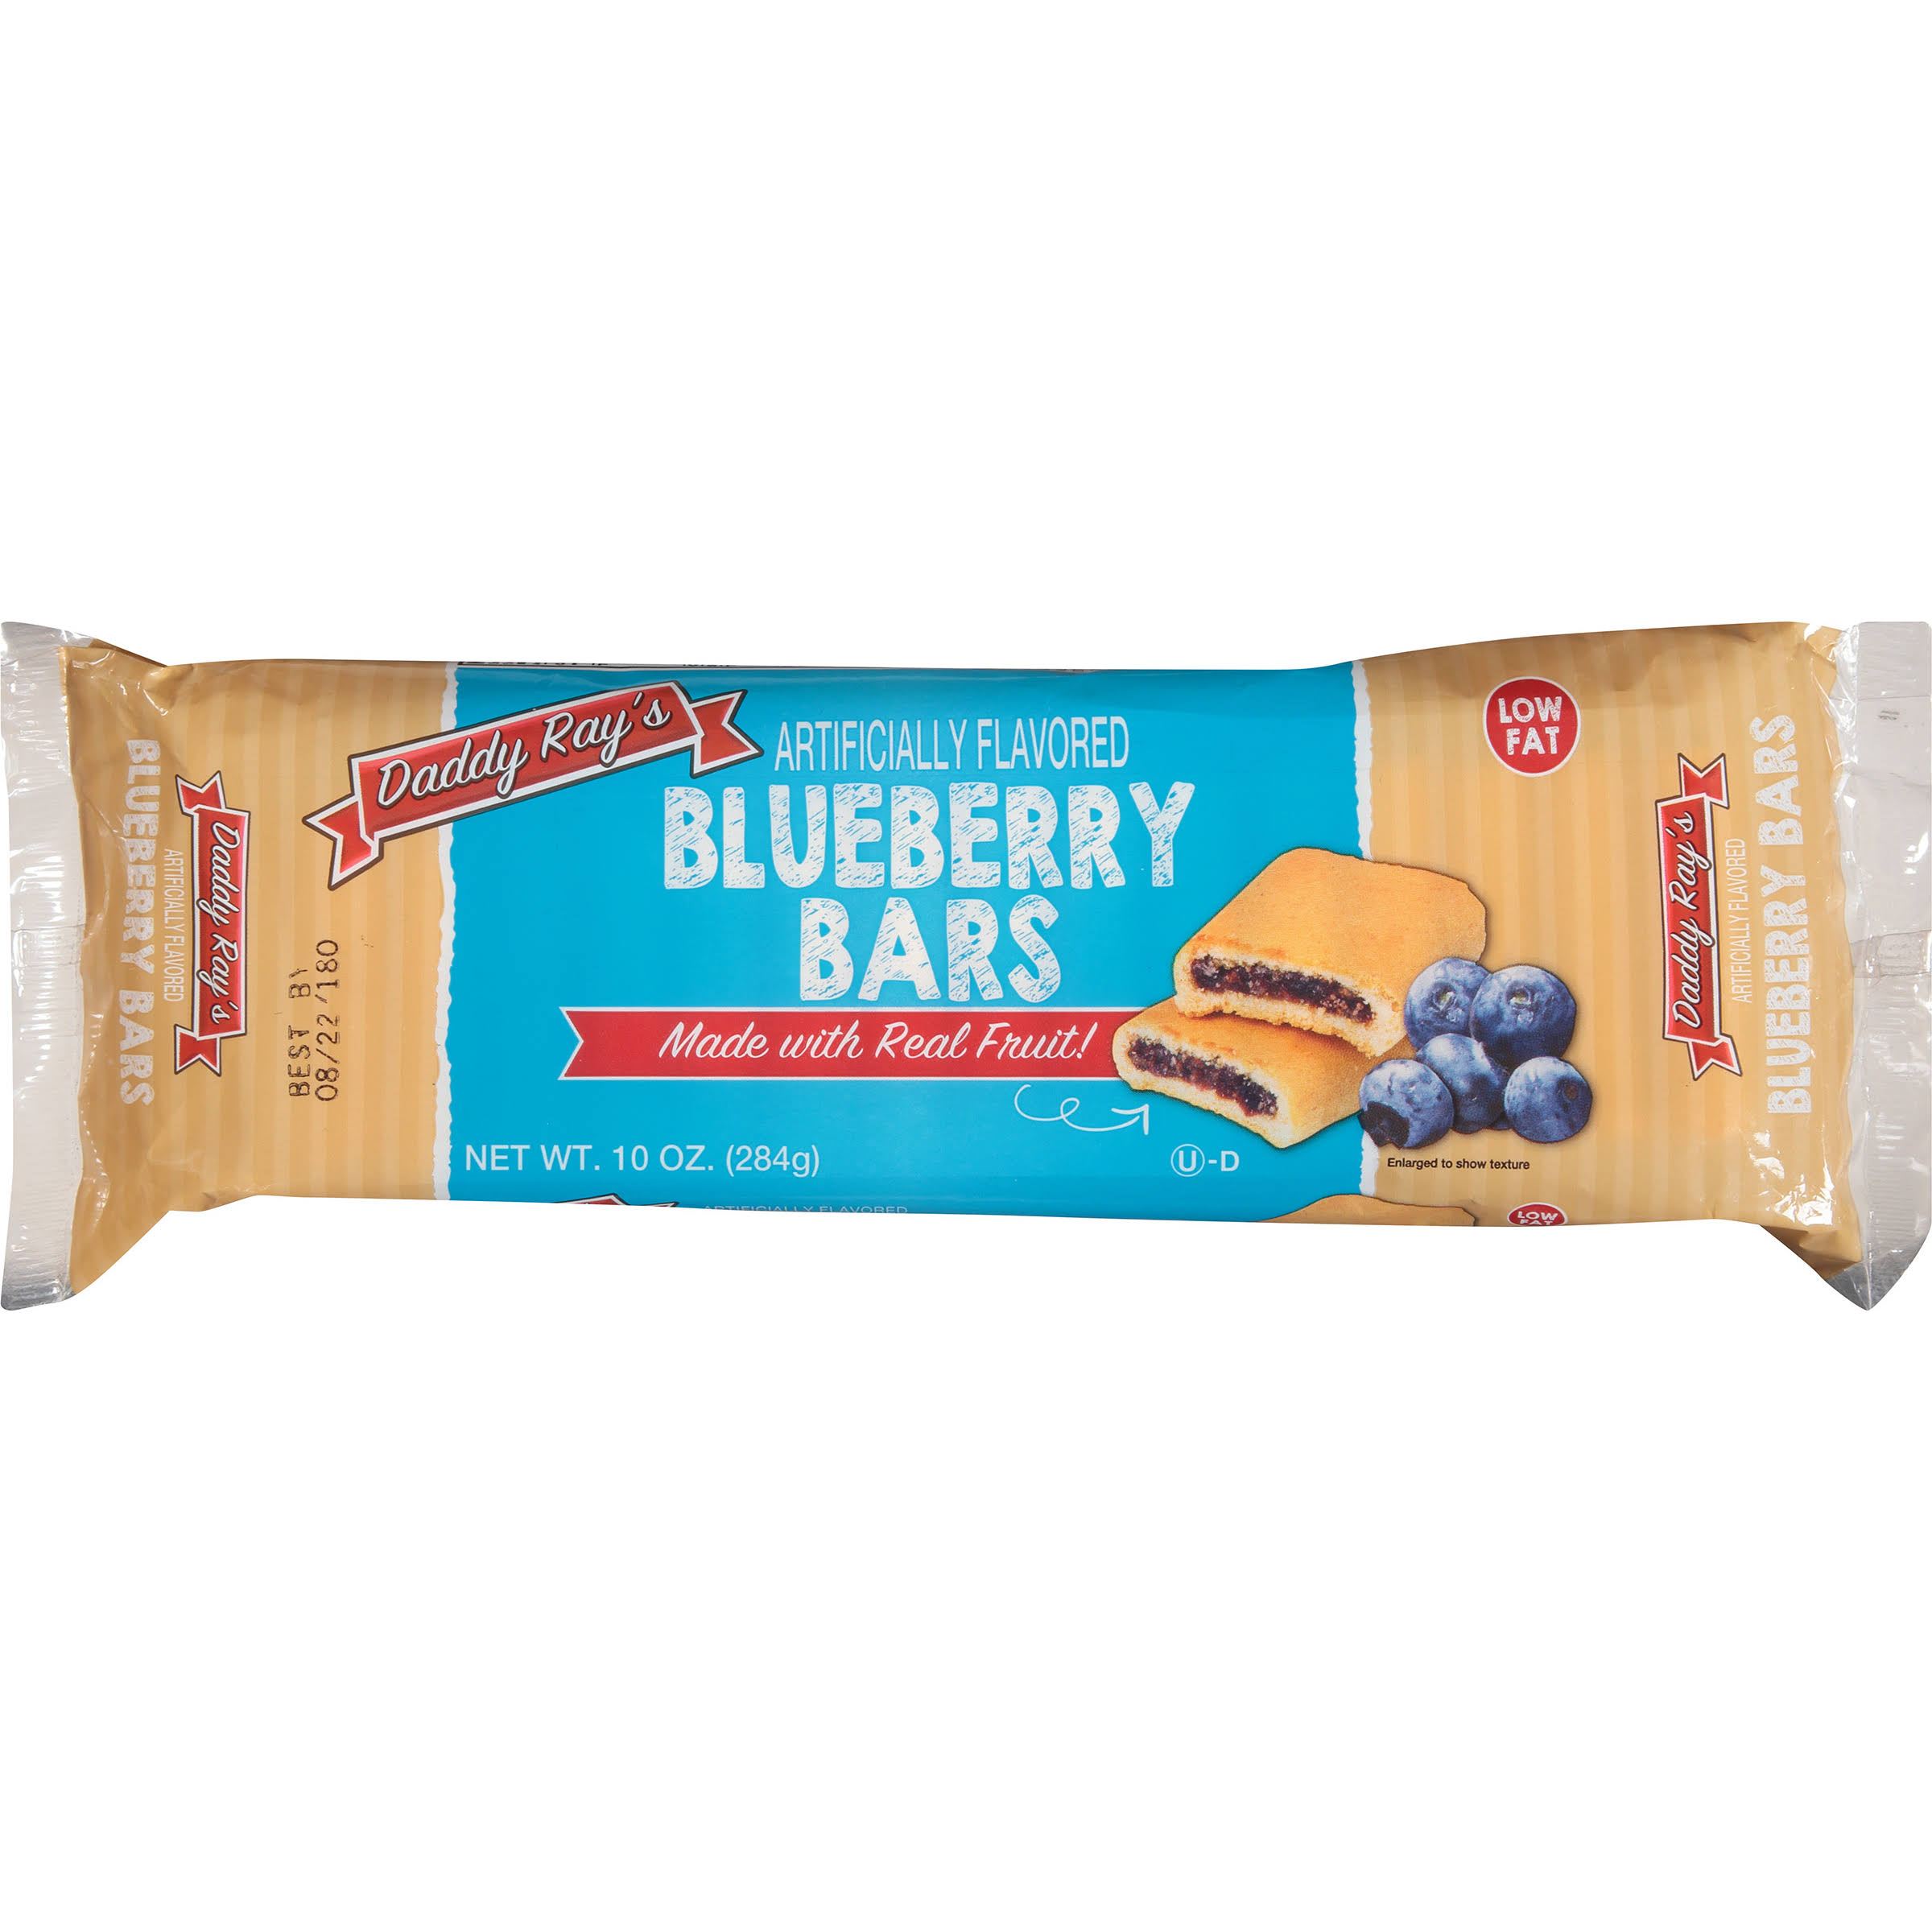 Daddy Ray's Blueberry Bars - 10oz